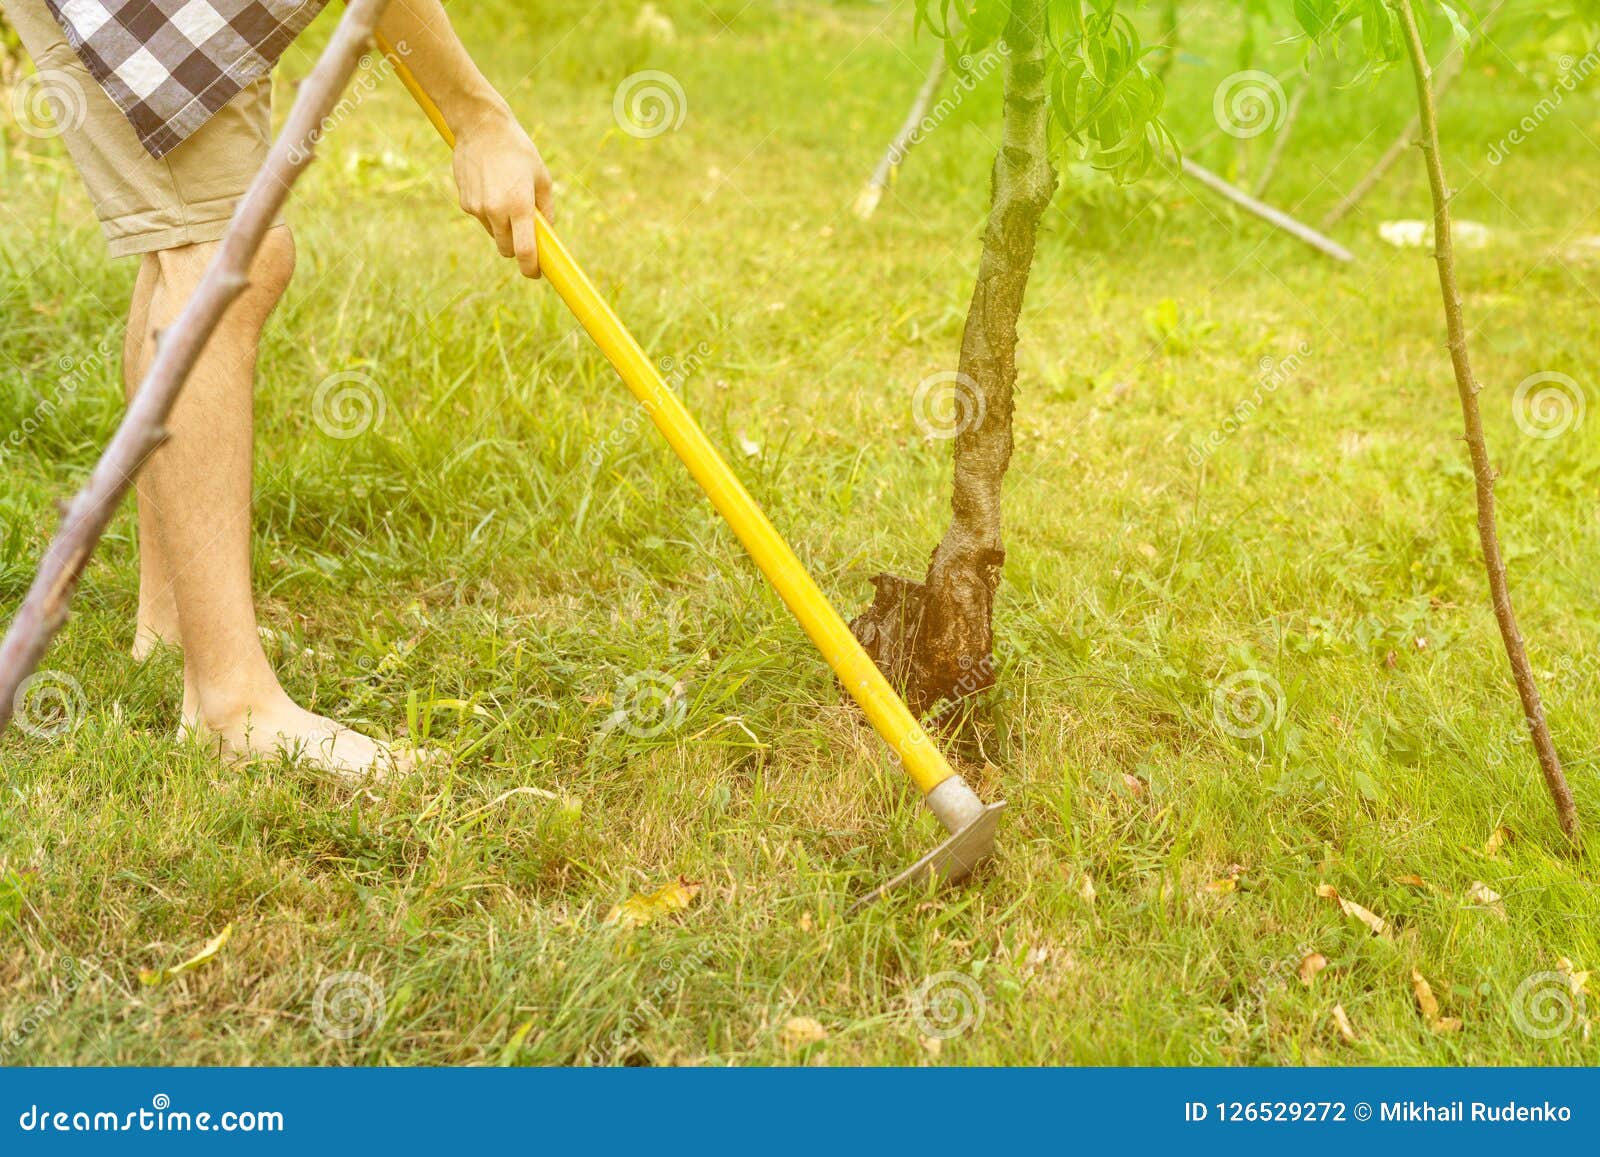 Man Working with Hoe in Garden Under Tree on Lawn a Stock Photo - Image ...